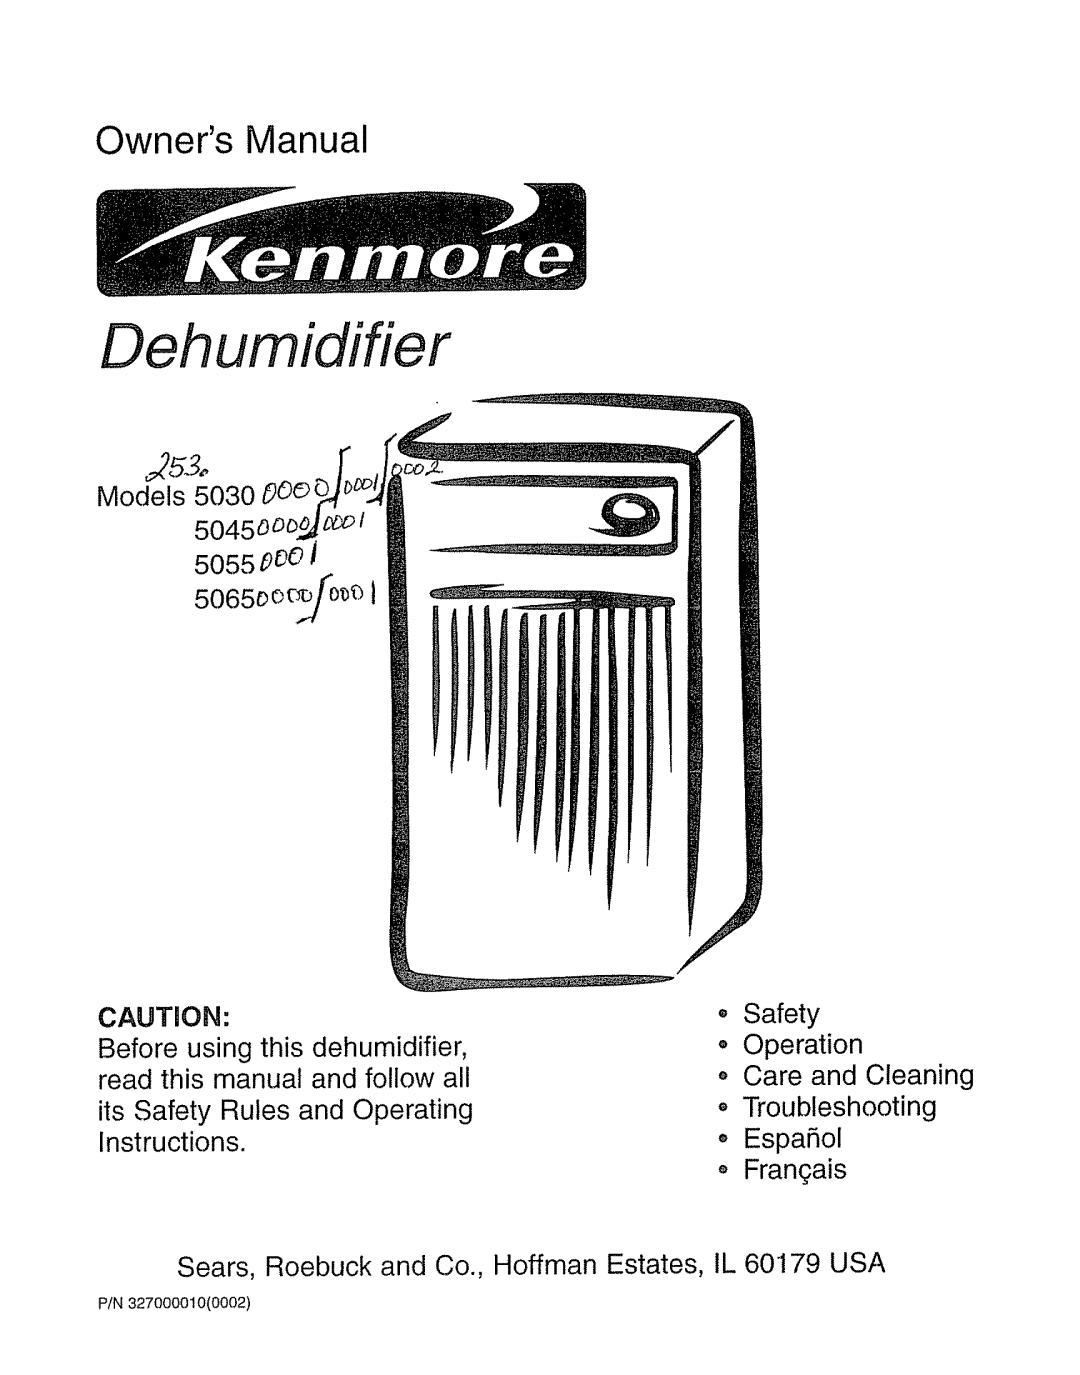 Kenmore 5065, 5055 owner manual Dehumidifier, Owners Manual, Models 5030 00o, its Safety Rules and Operating Instructions 